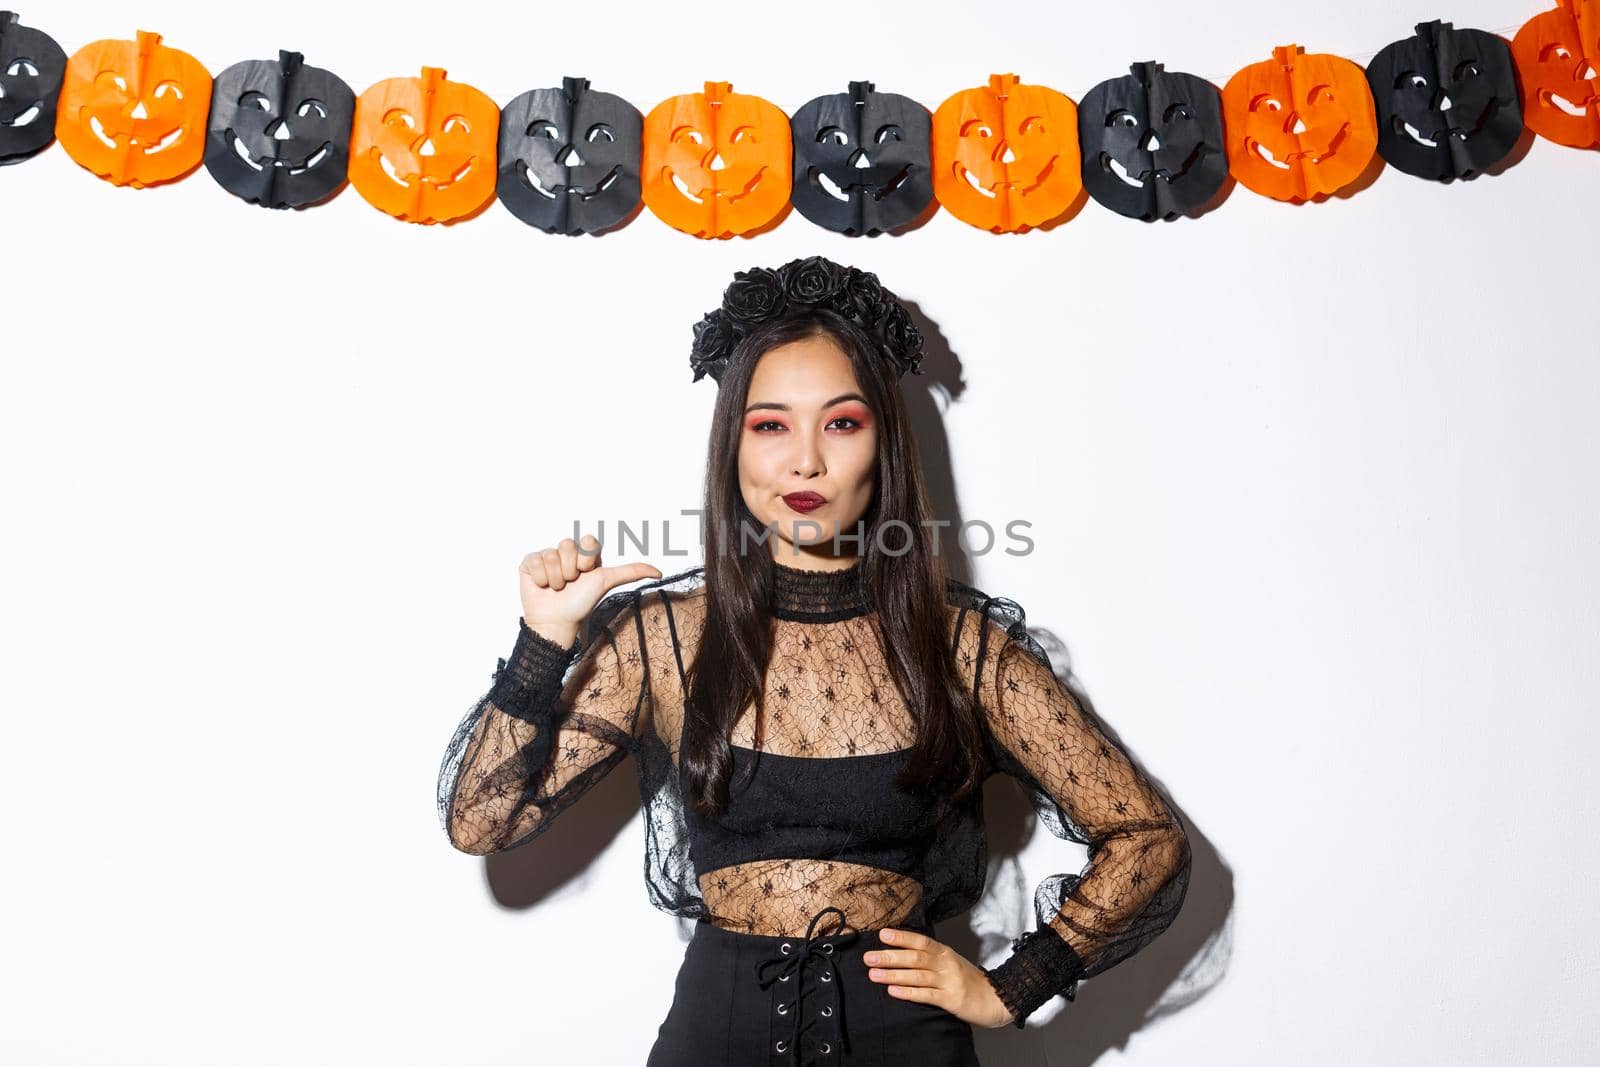 Confident asian woman in stylish gothic dress and black wreath pointing at herself like professional, standing against halloween decorations.